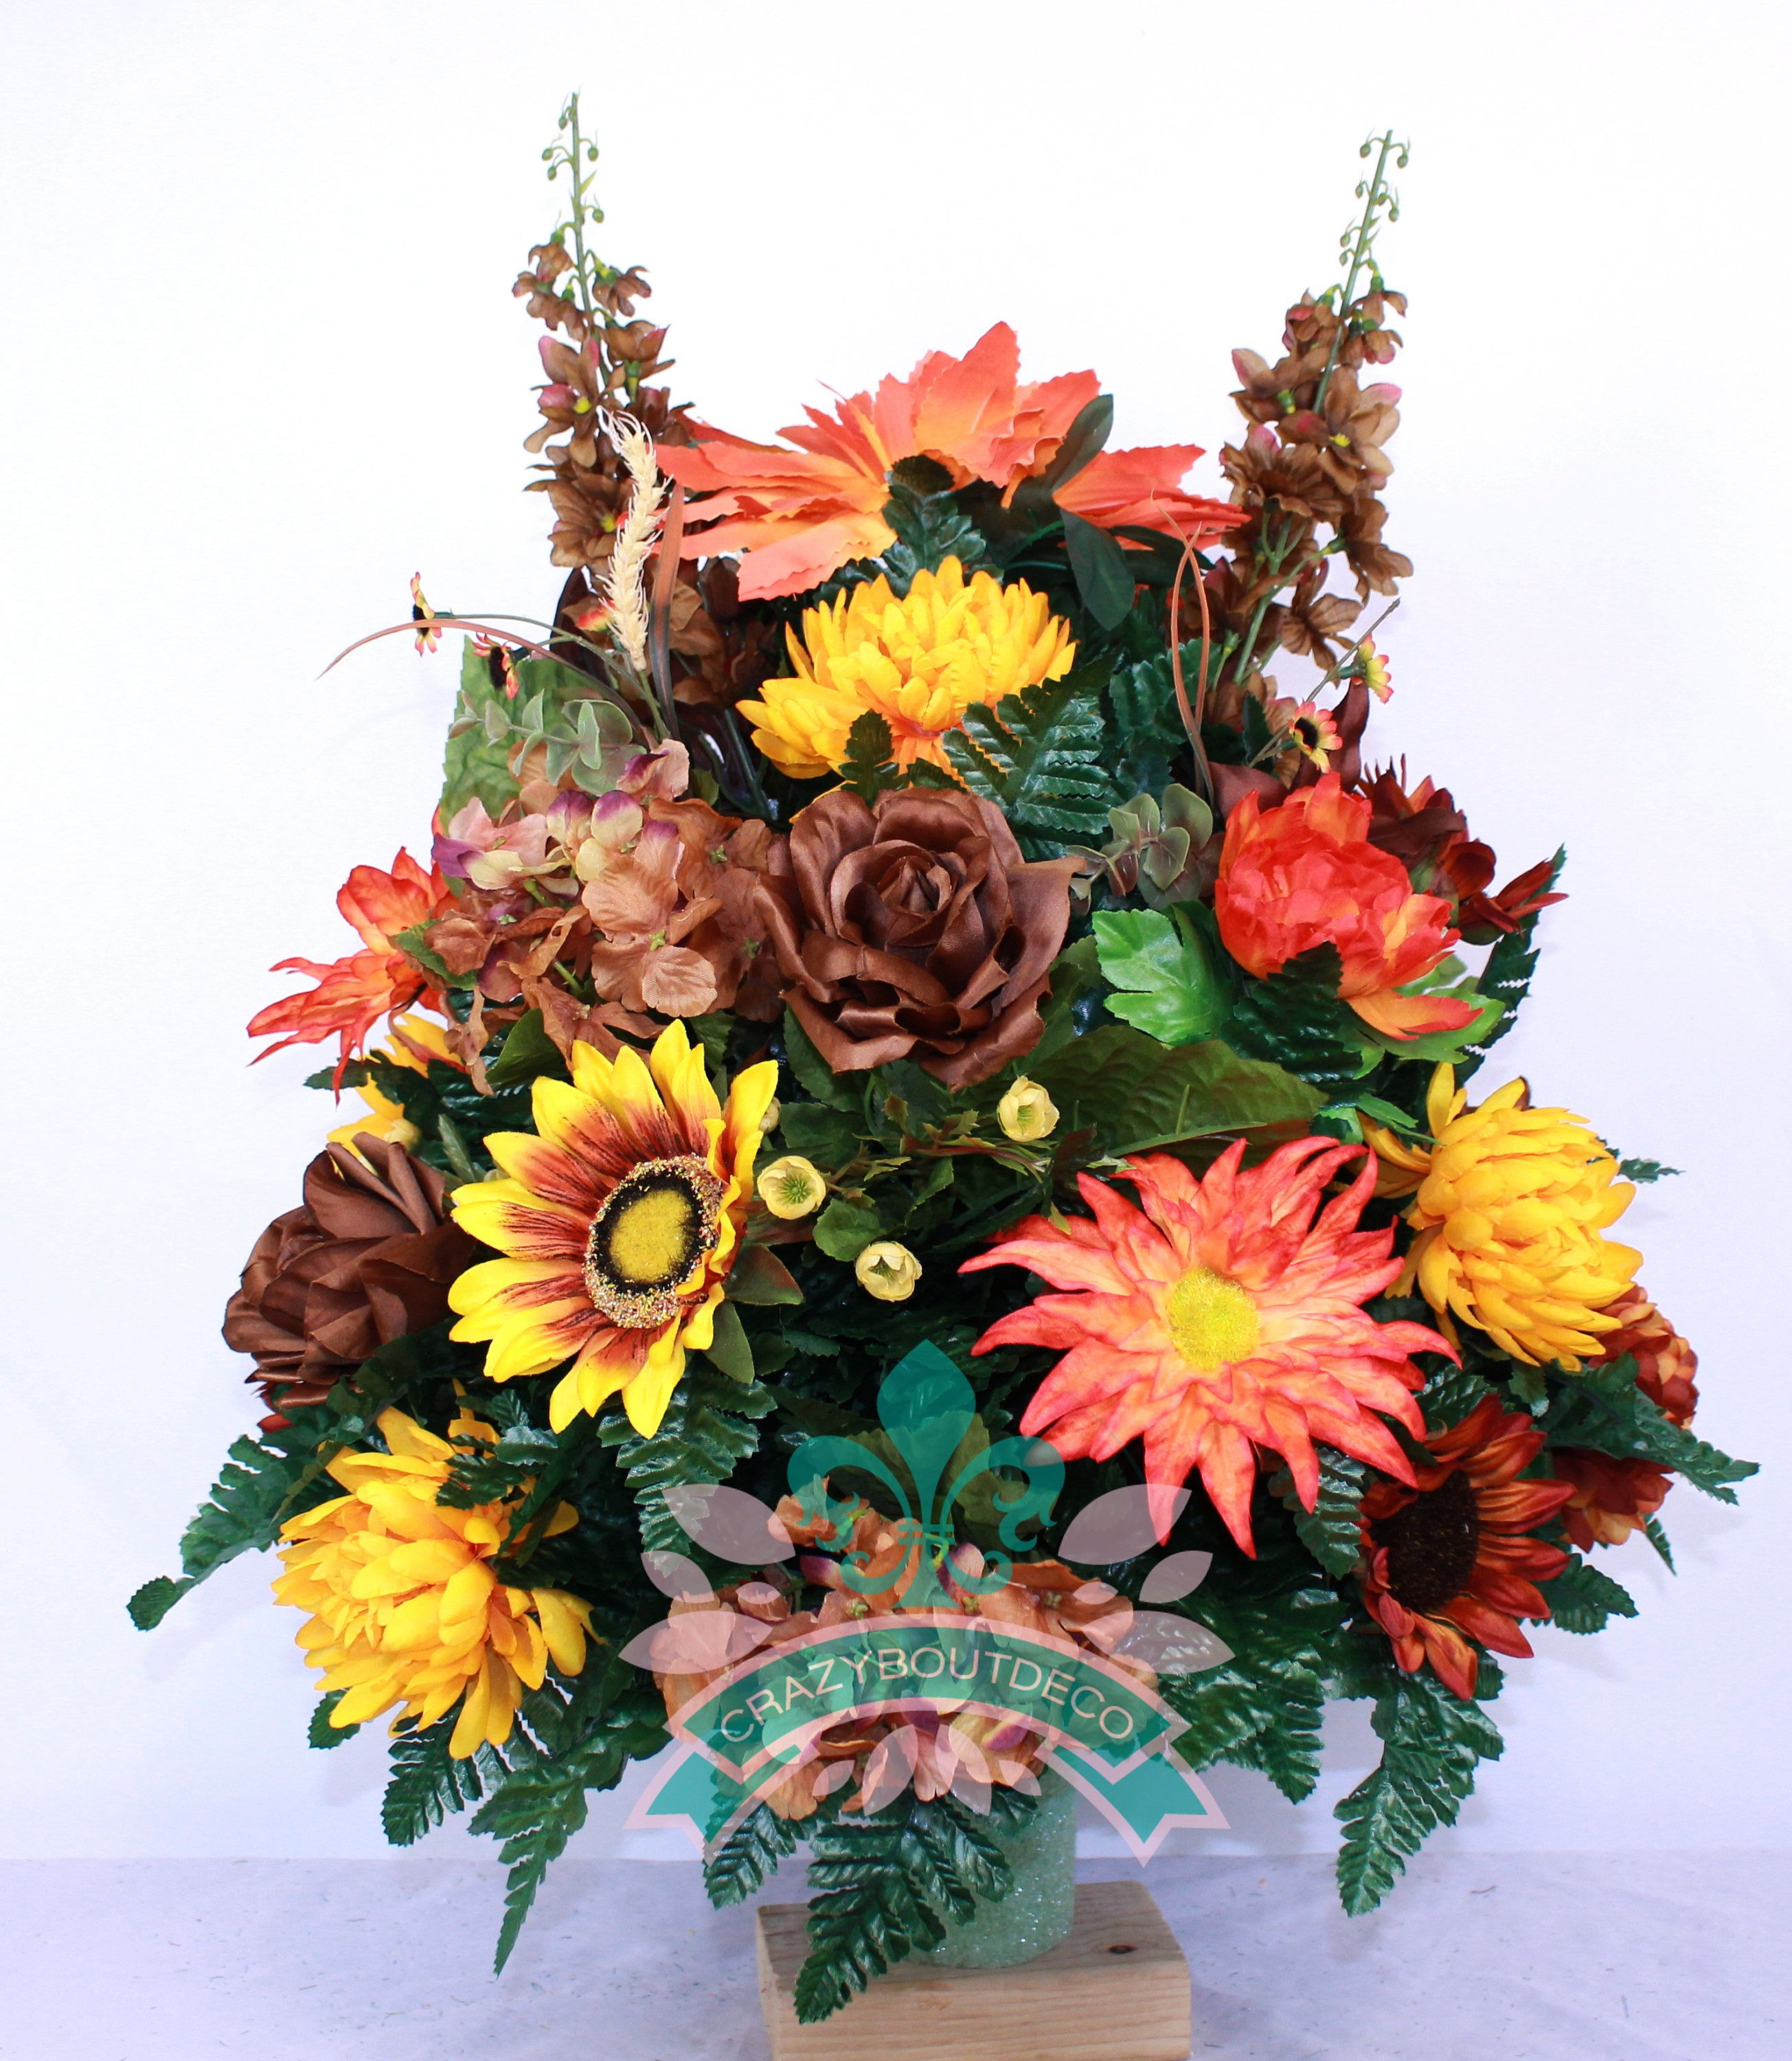 26 Unique tombstone Flower Vases 2024 free download tombstone flower vases of beautiful xl fall flower mixture cemetery arrangement for 3 inch within beautiful xl fall flower mixture cemetery arrangement for 3 inch vase by crazyboutdeco on et